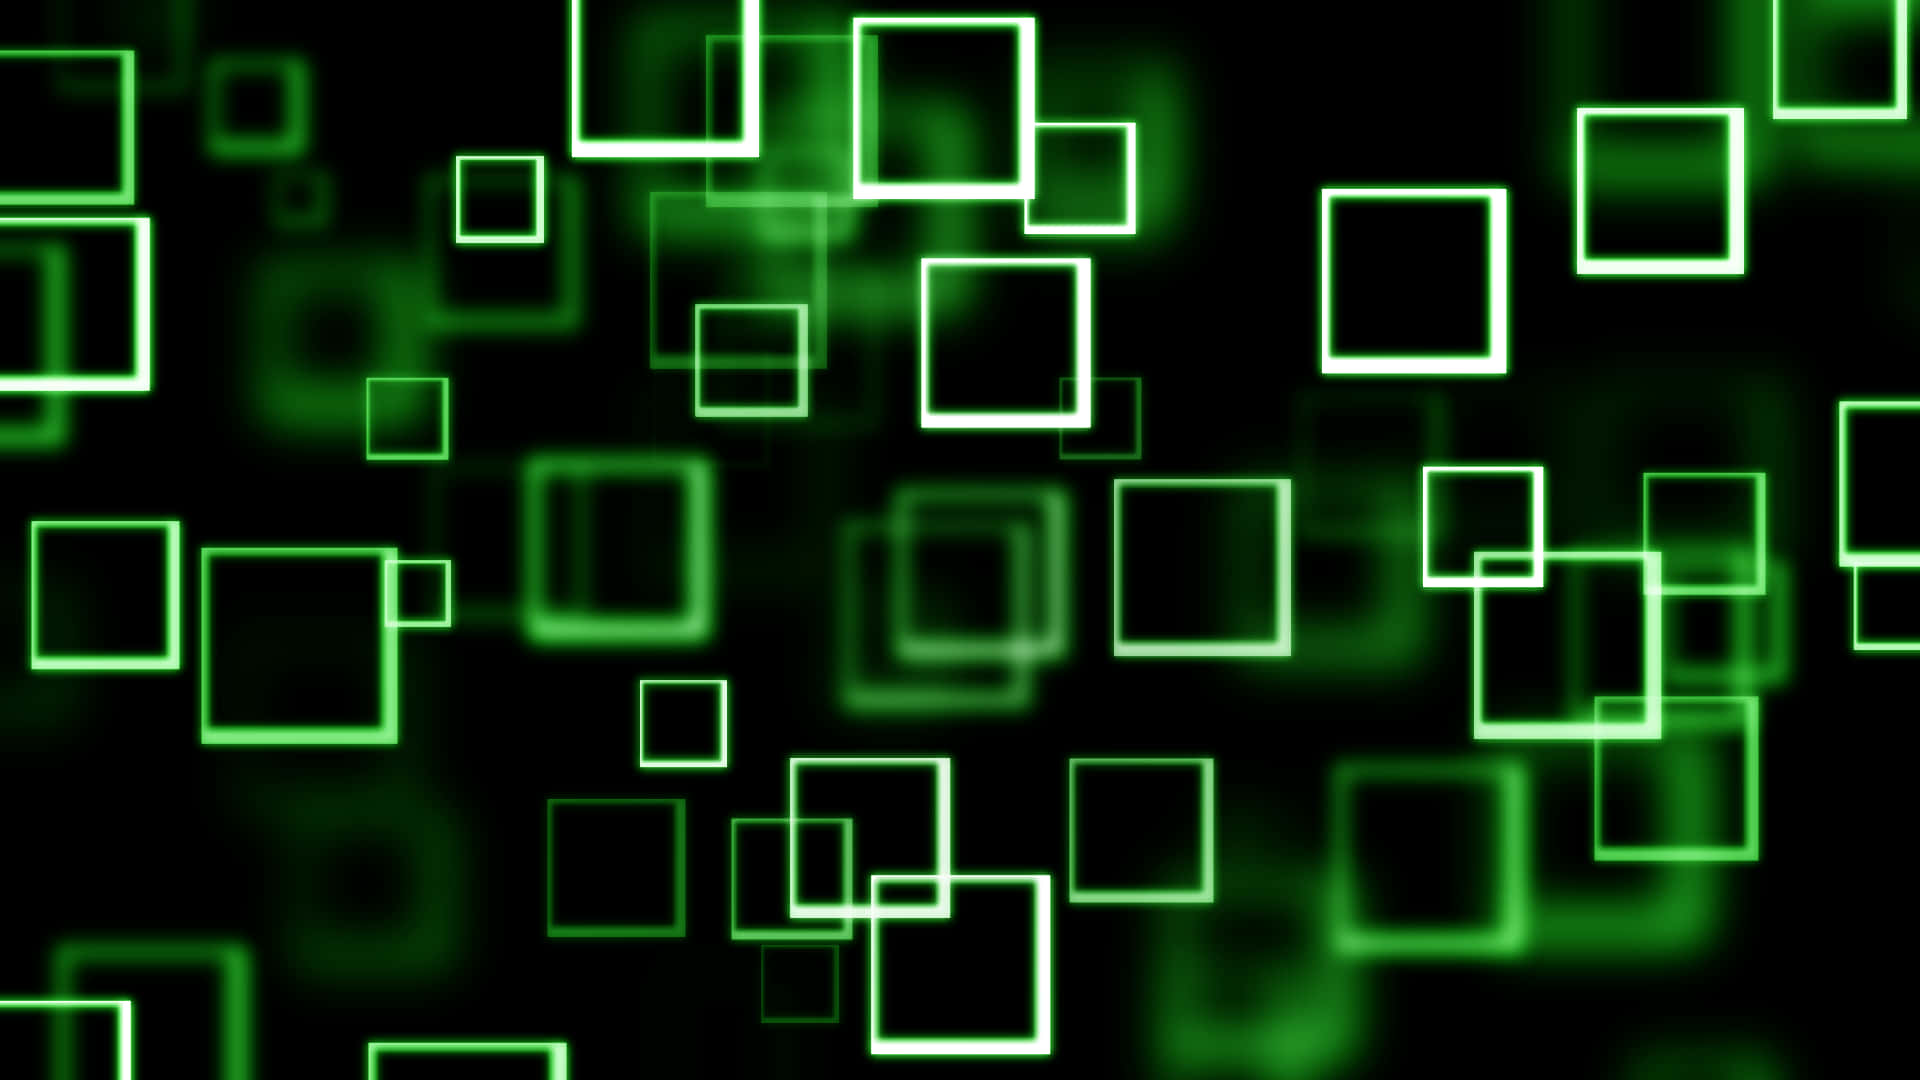 green squares on a black background